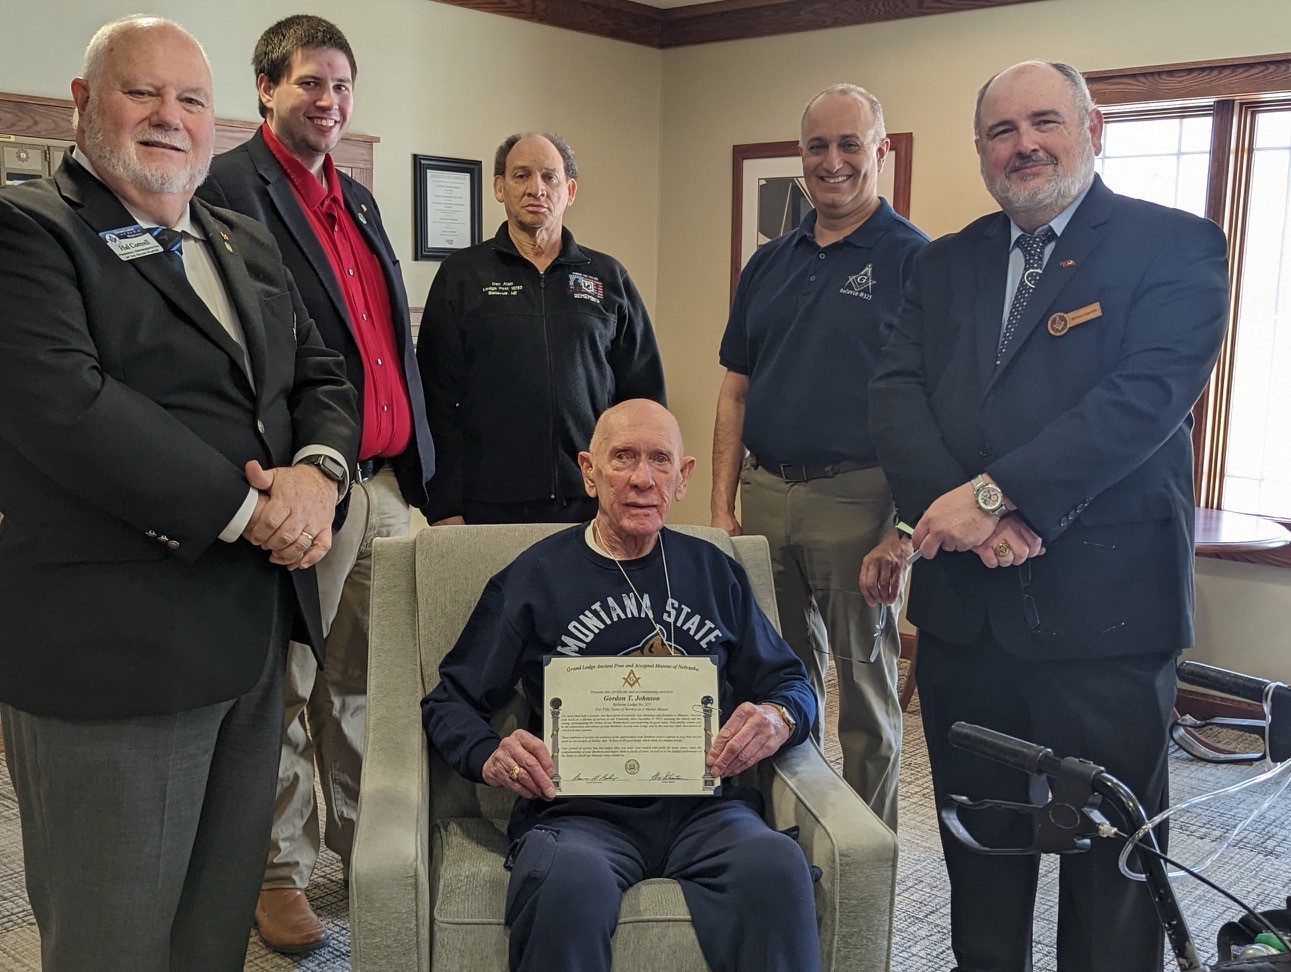 On February 26, 2022 members of Bellevue Lodge presented Br. Gordon Johnson with his 50 year pin and certificate.